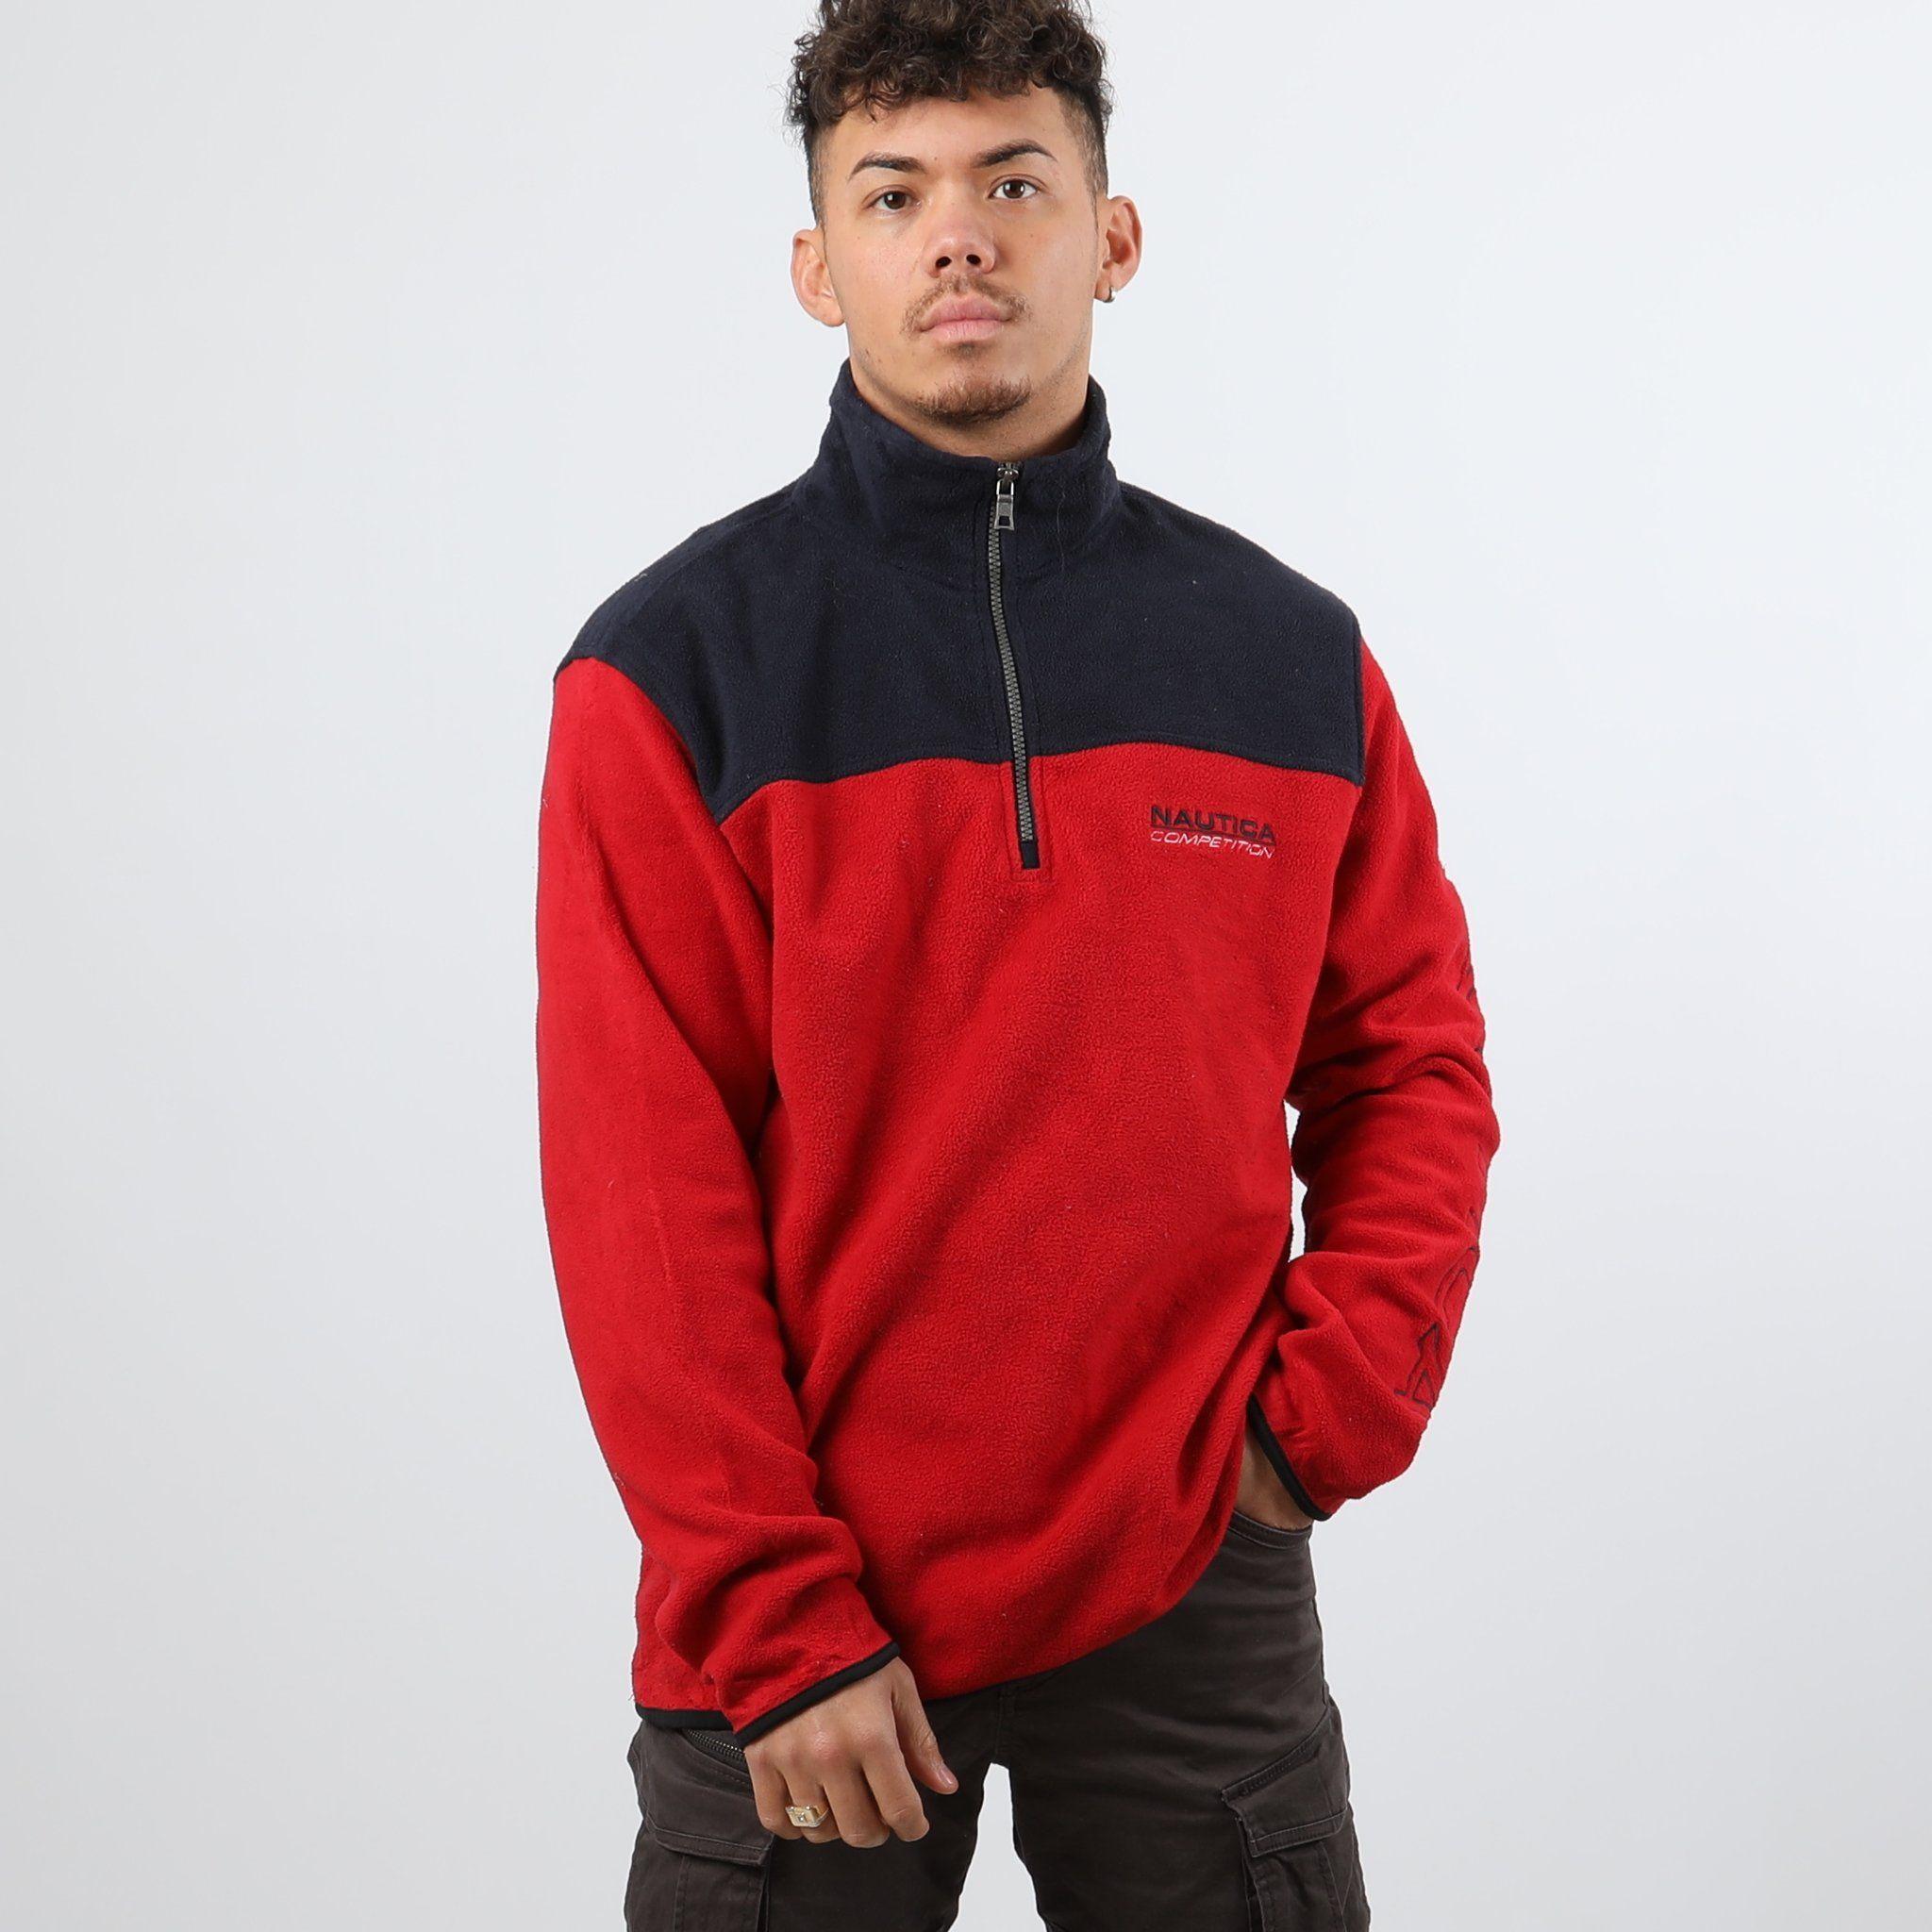 Large Red S Logo - Nautica Competition Large Red & Navy Embroidered Logo 1 4 Zip Fleece